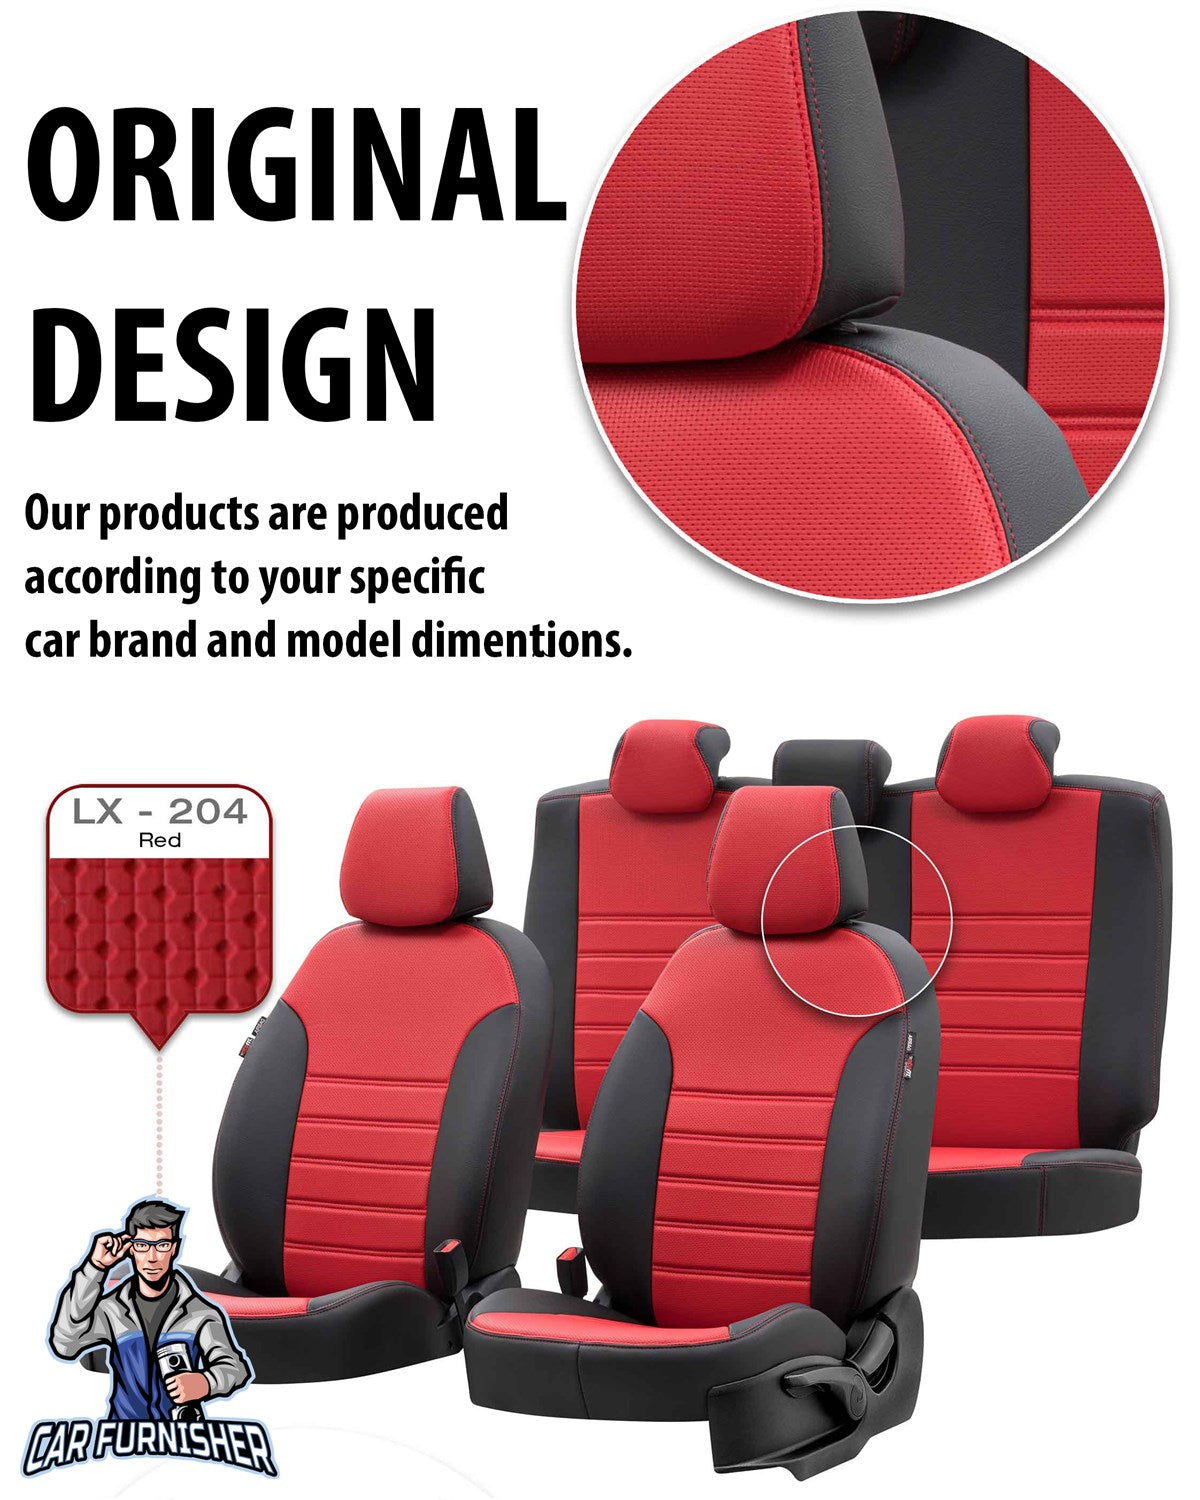 Volkswagen Touareg Seat Cover New York Leather Design Smoked Leather